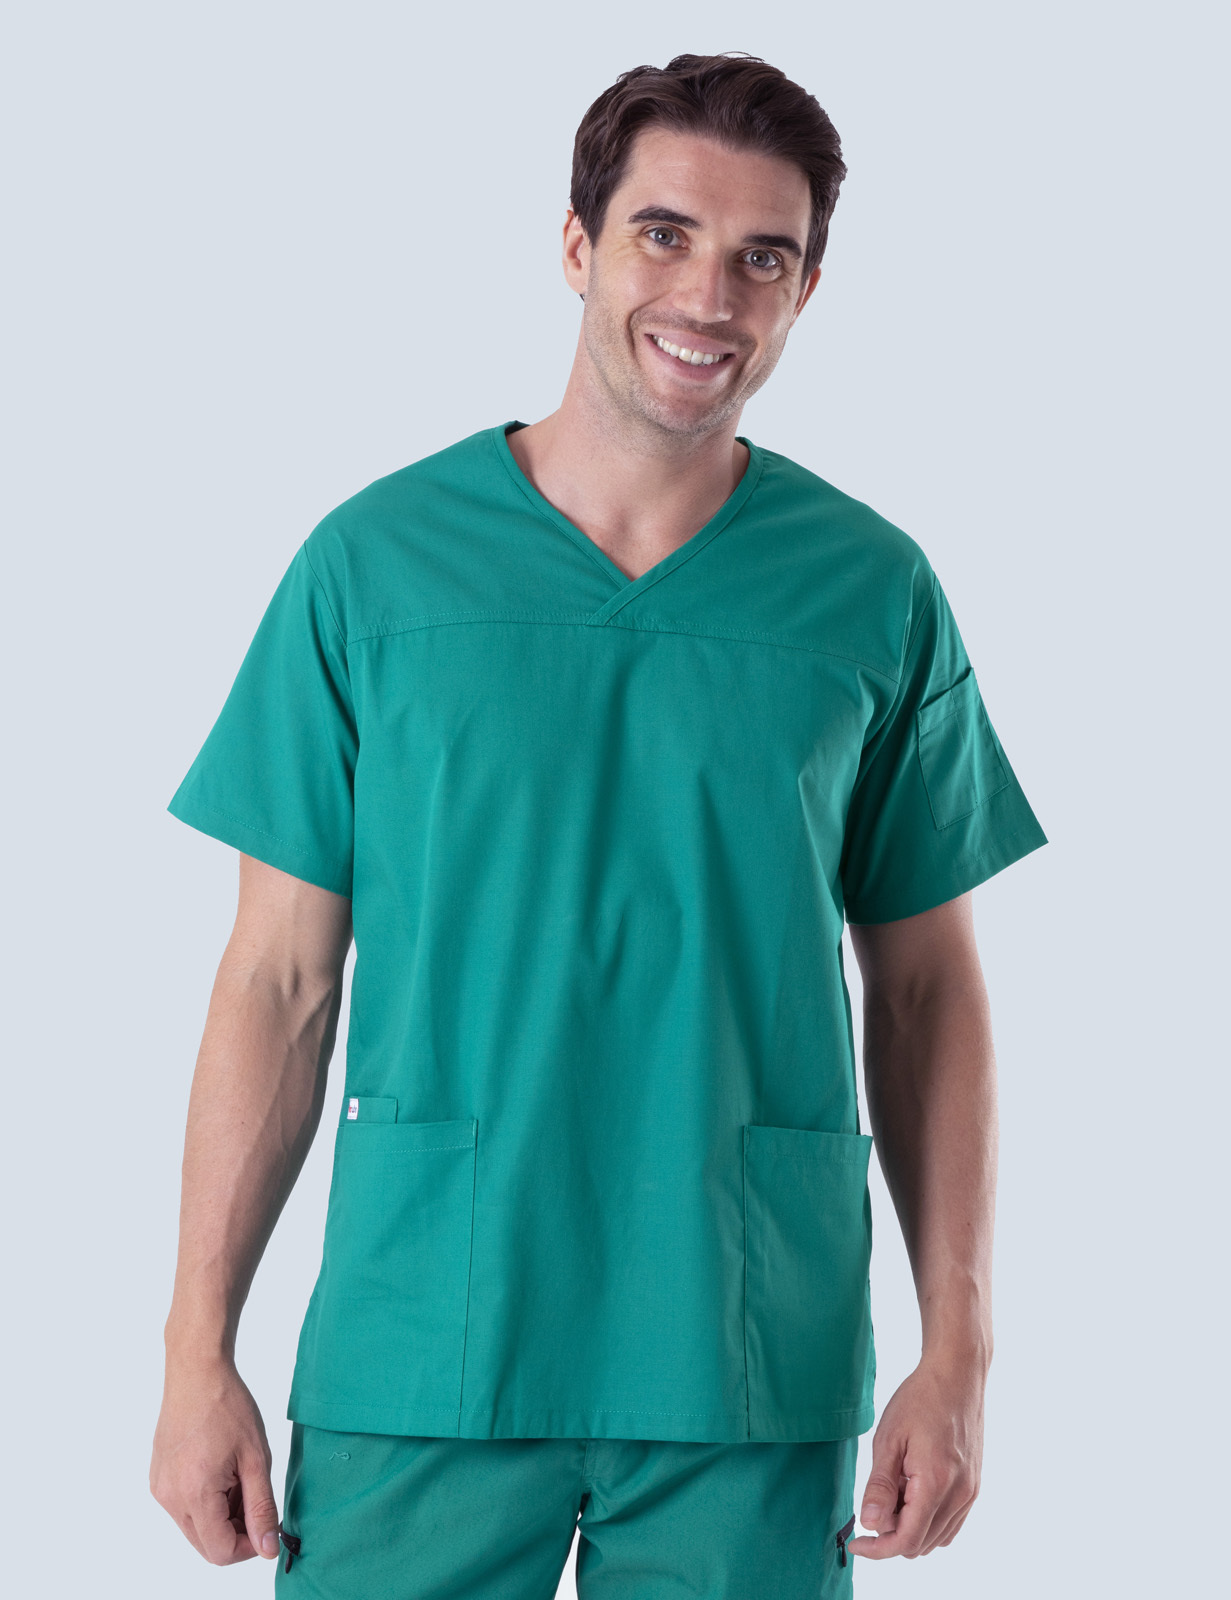 Men's Fit Solid Scrub Top - Hunter - 4X large